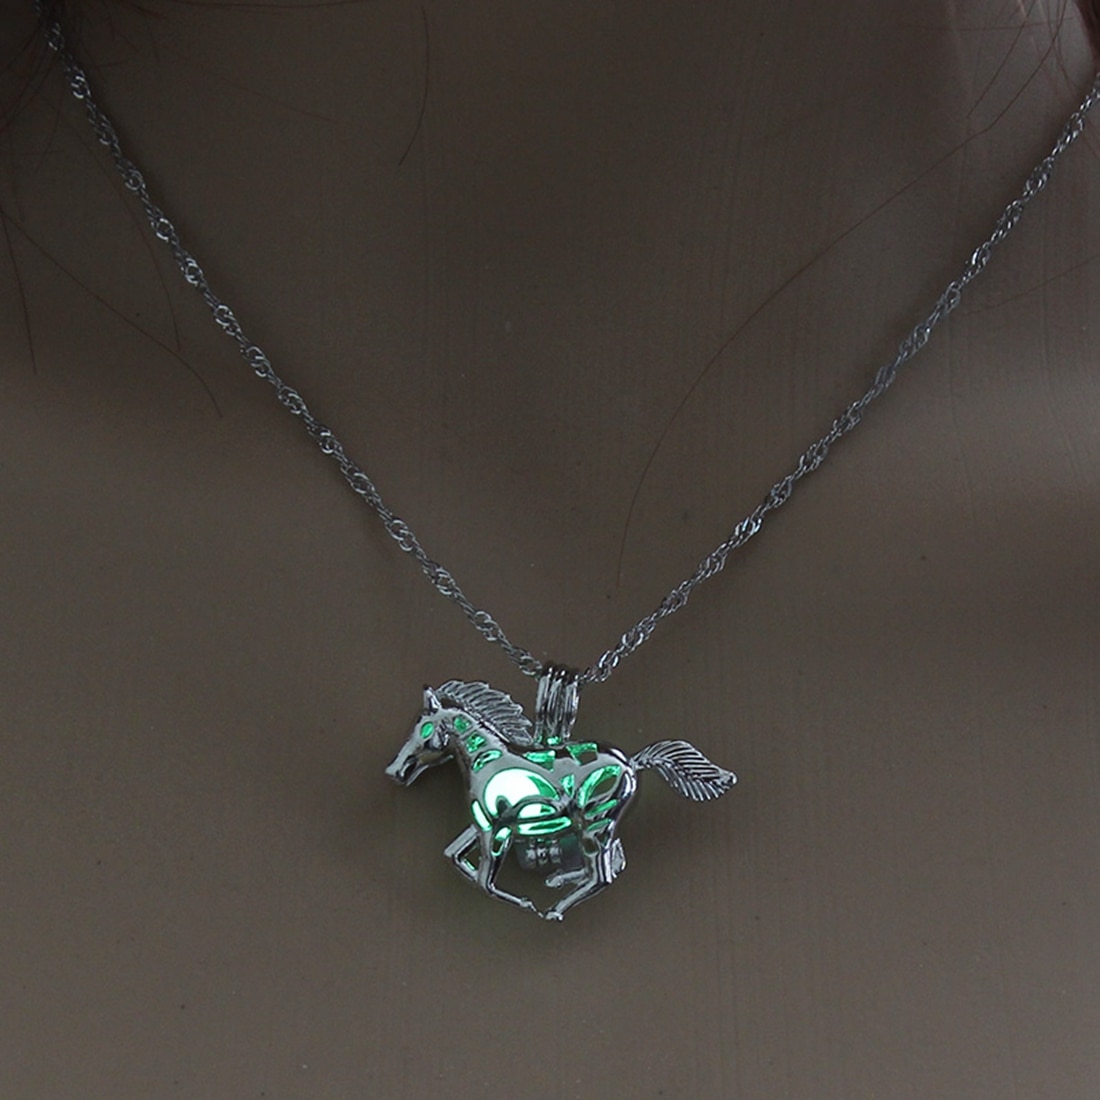 Glow In The Dark Necklace Luminous Necklace